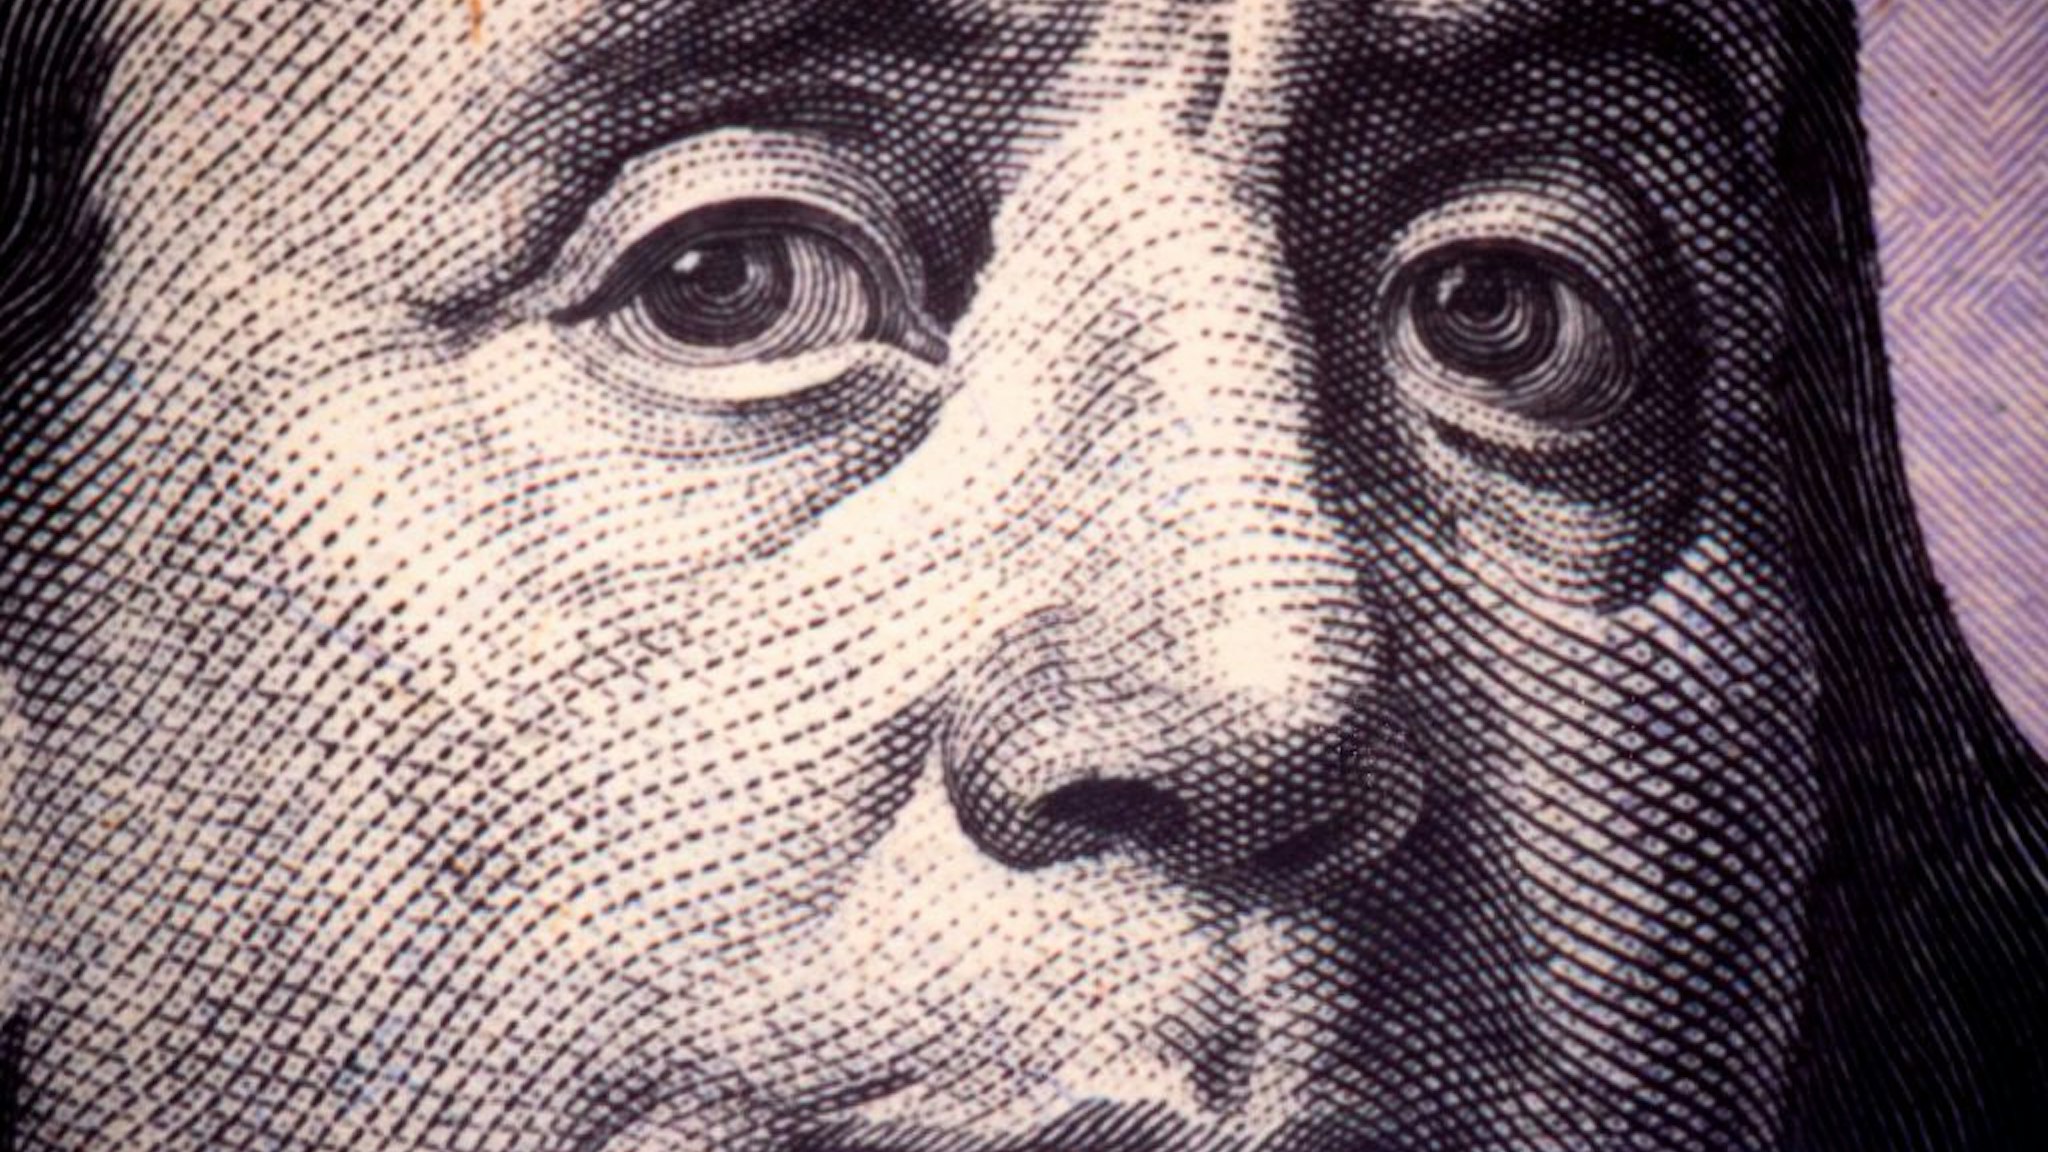 A close up photo of Benjamin Franklin, one of the founding fathers of the United States, as seen on a US $100 Federal Reserve Note November 17, 2015 at the Department of the Treasury, Bureau of Engraving and Printing in Washington, DC. AFP PHOTO/PAUL J. RICHARDS (Photo by Paul J. RICHARDS / AFP) (Photo by PAUL J. RICHARDS/AFP via Getty Images)